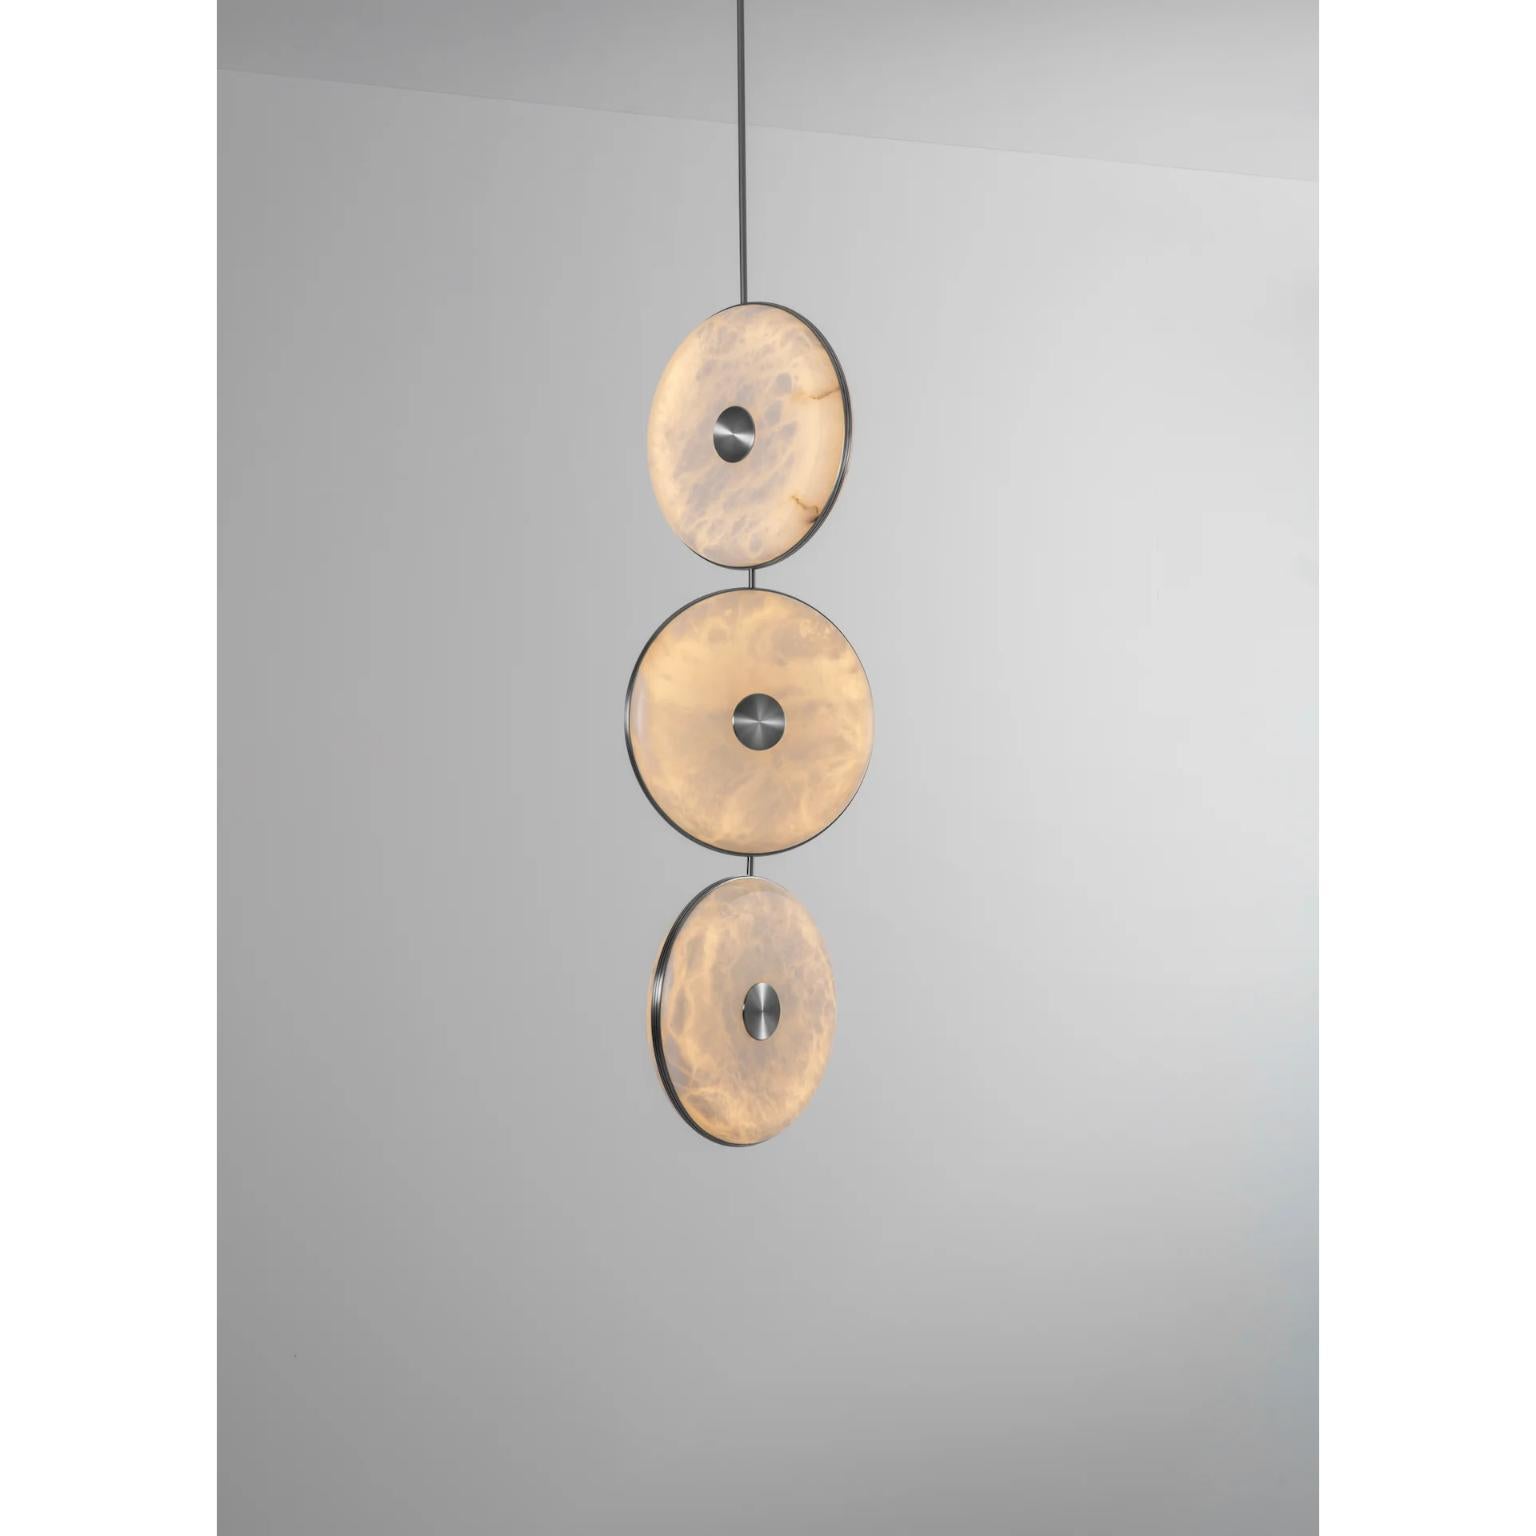 Beran Satin Nickel Large Drop 3 Chandelier by Bert Frank
Dimensions: Ø 36 x H 100 cm. 
Materials: Nickel and alabaster.

Available in two different sizes. Available in different finishes and materials: Brushed brass, Antique brass, Dark bronze and